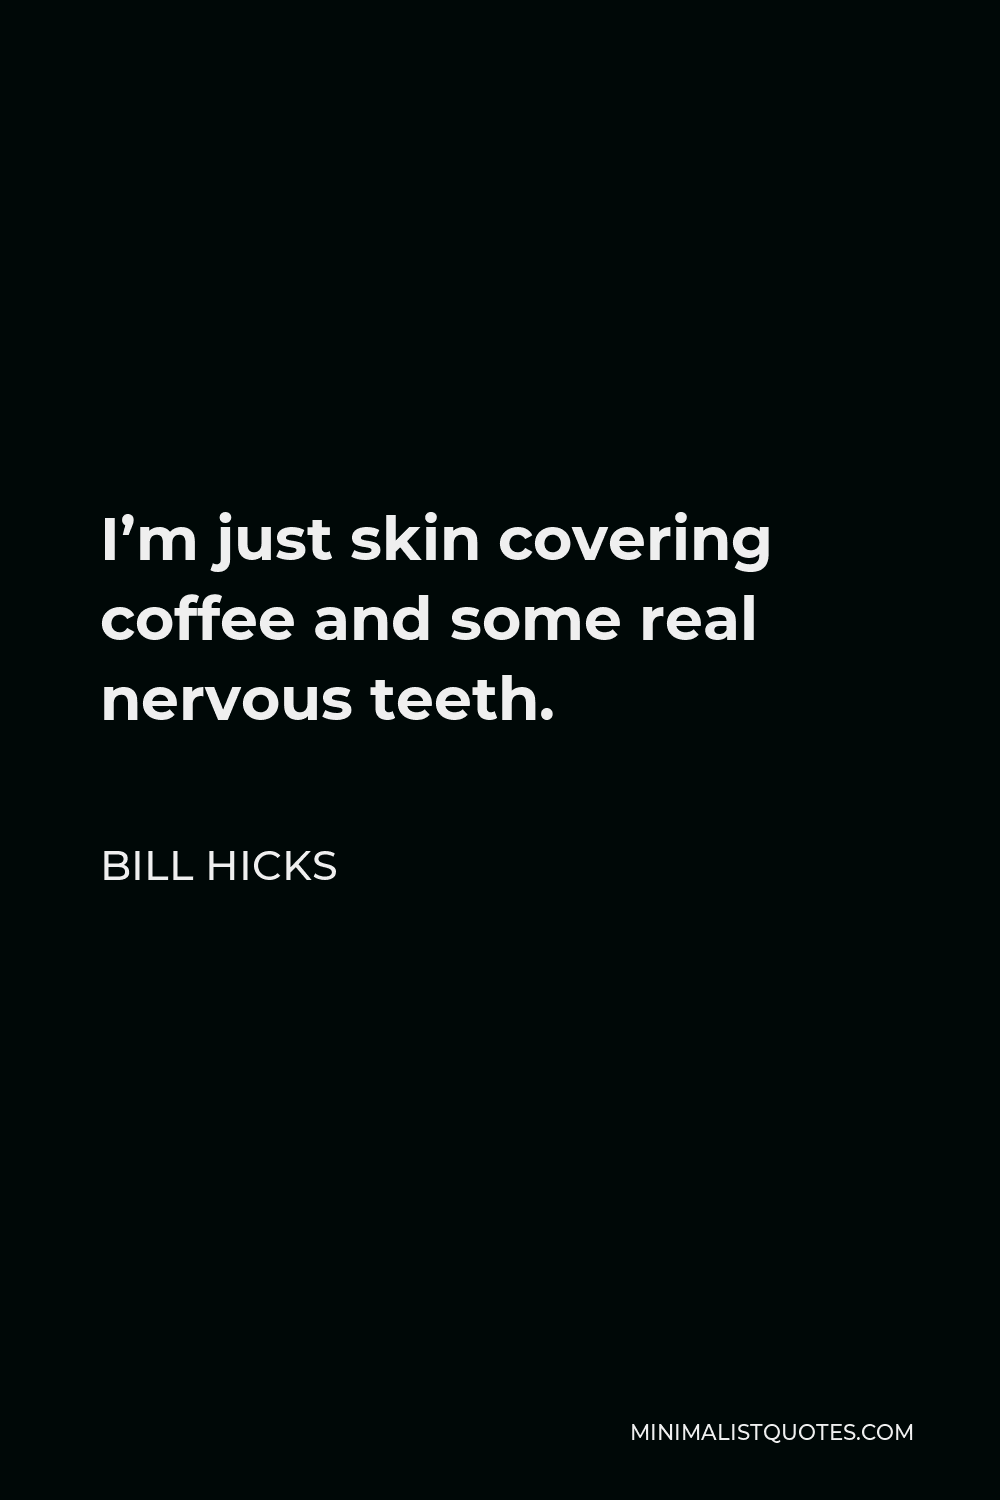 Bill Hicks Quote - I’m just skin covering coffee and some real nervous teeth.